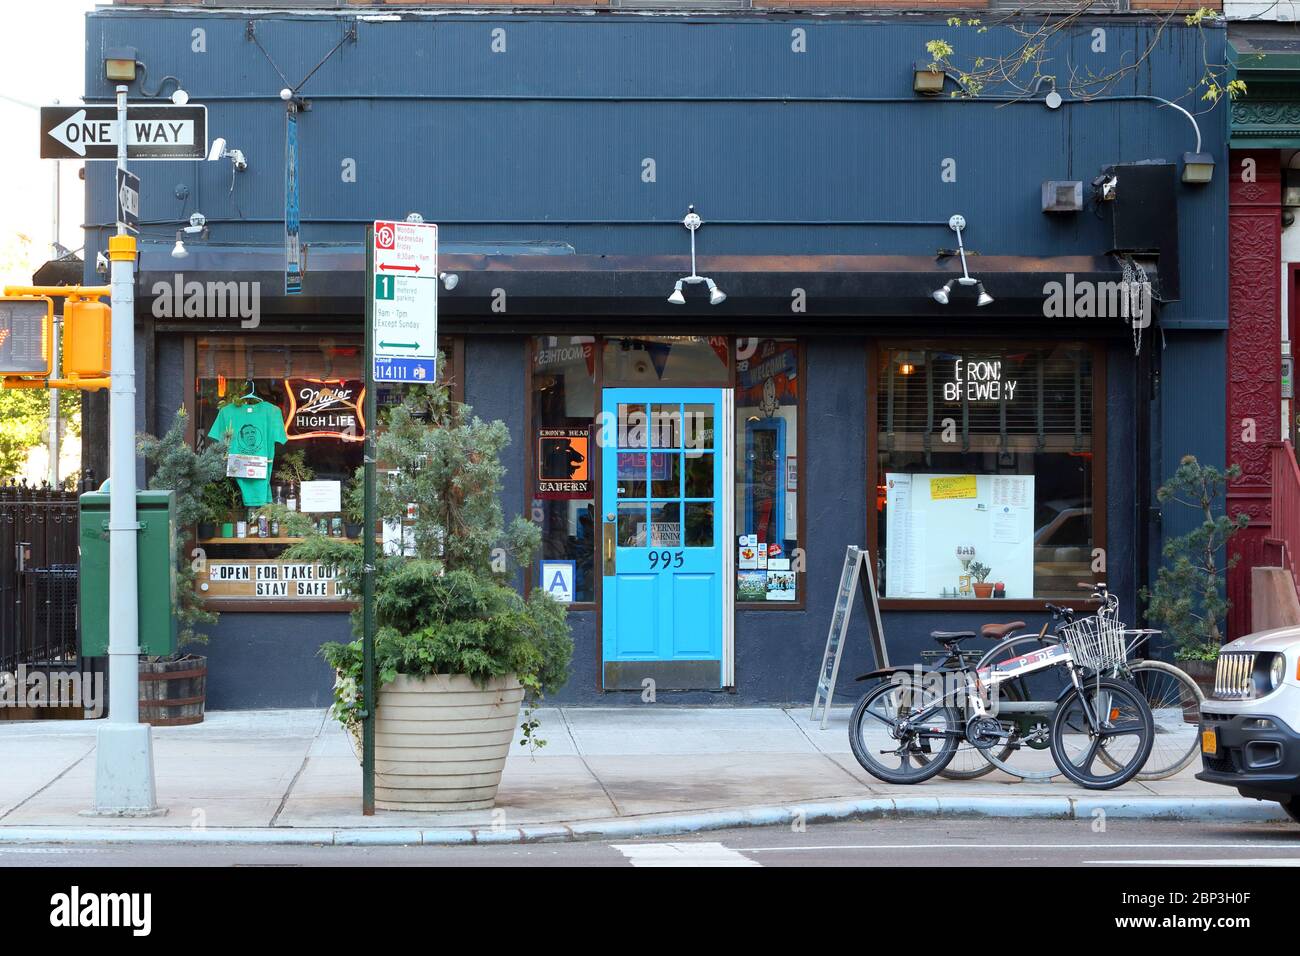 Lion's Head Tavern, 995 Amsterdam Avenue, New York, NY. exterior storefront of a neighborhood bar in Manhattan's Manhattan Valley neighborhood. Stock Photo